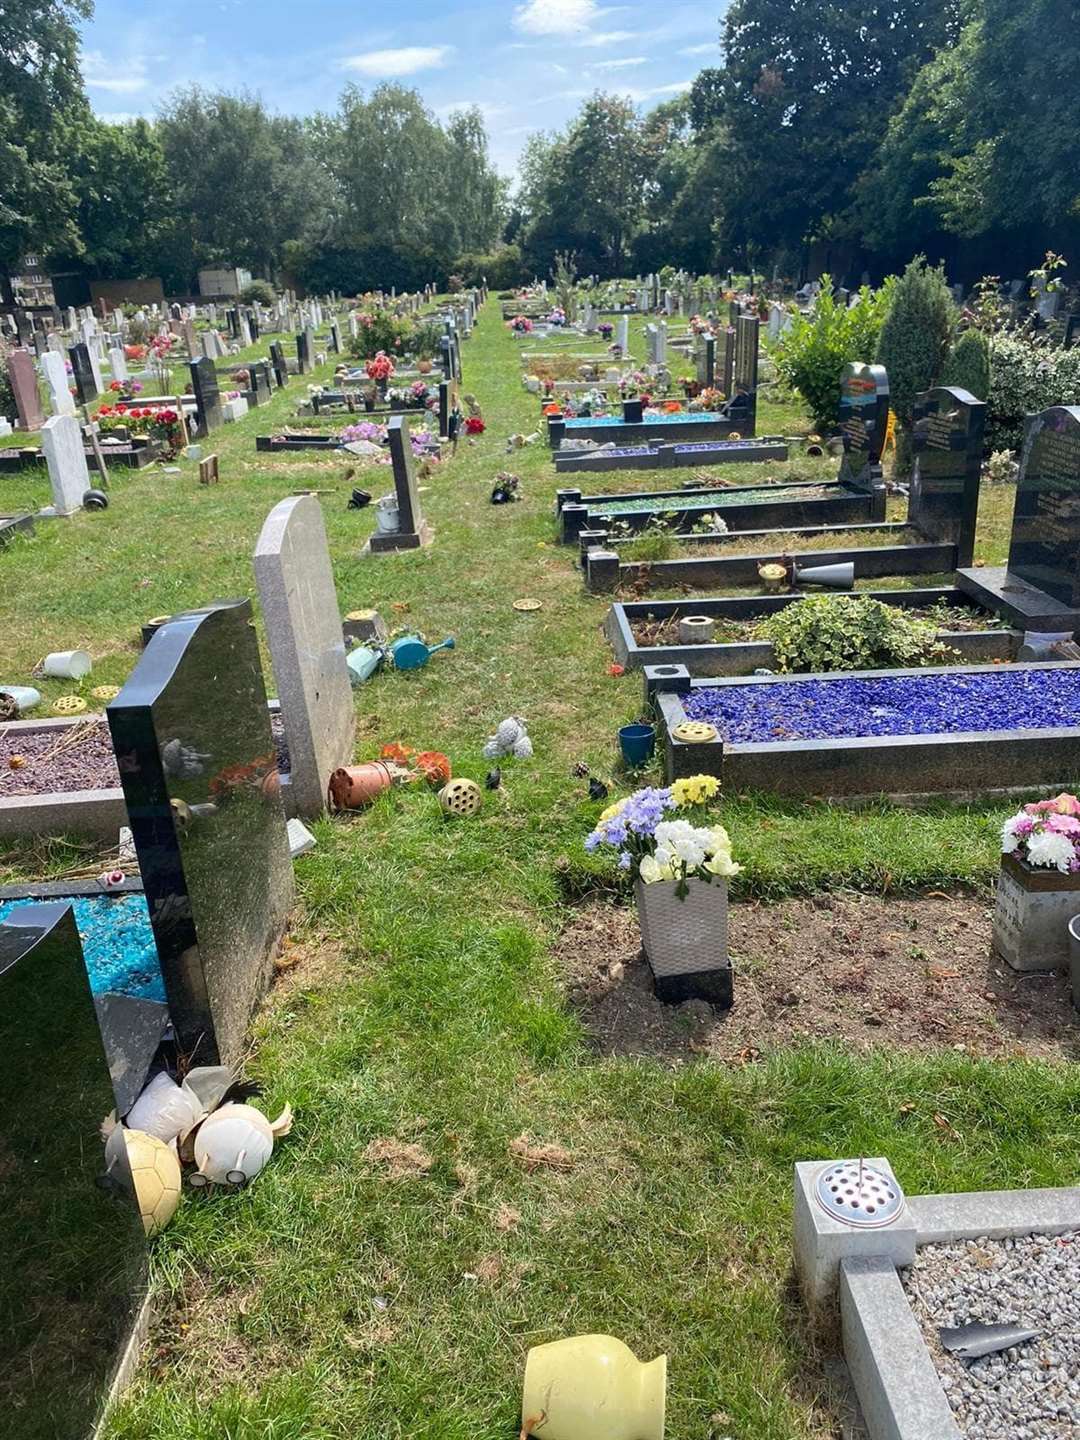 Police arrested a woman after graves were vandalised in Swanscombe on Thursday. Picture: Emma Ben Moussa